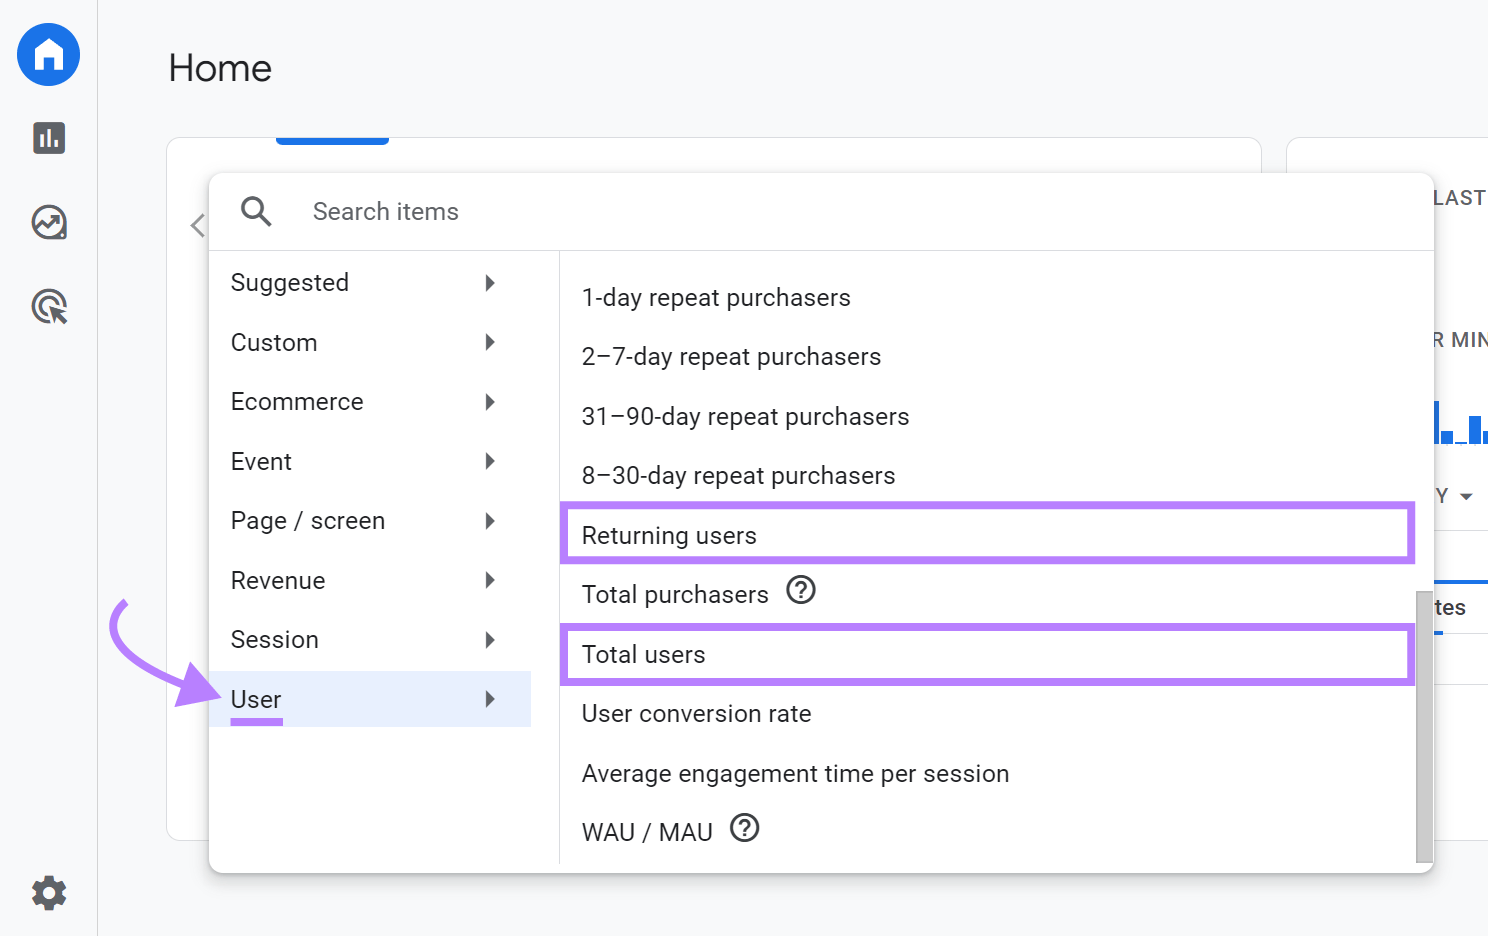 "Returning users", and "Total users" selected from "User" drop-down menu in GA4